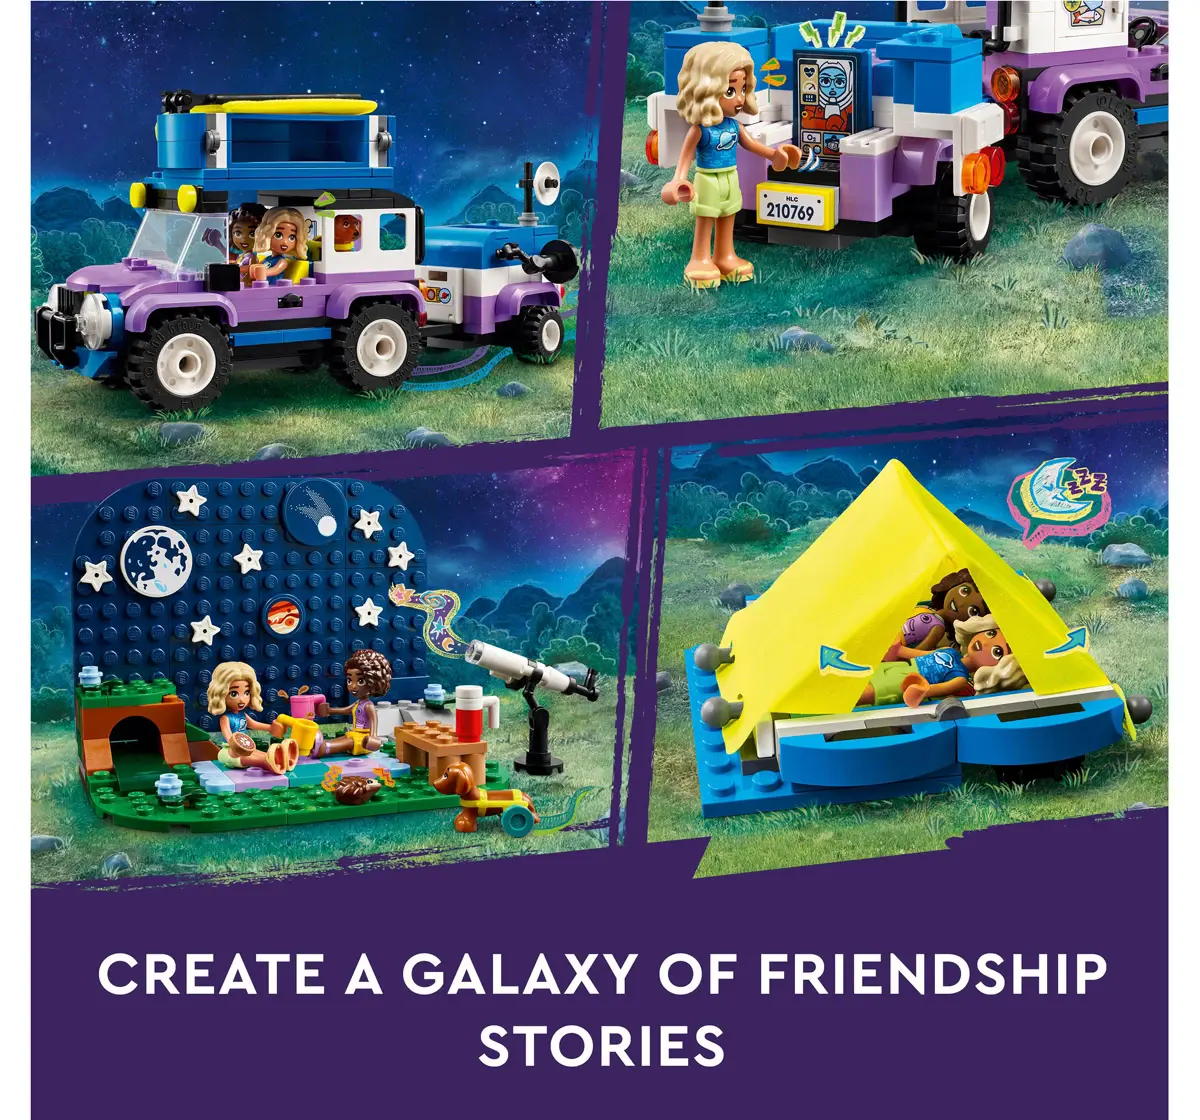 Lego Friends Stargazing Camping Vehicle Toy 42603 Multicolour For Kids Ages 7Y+ (364 Pieces) 